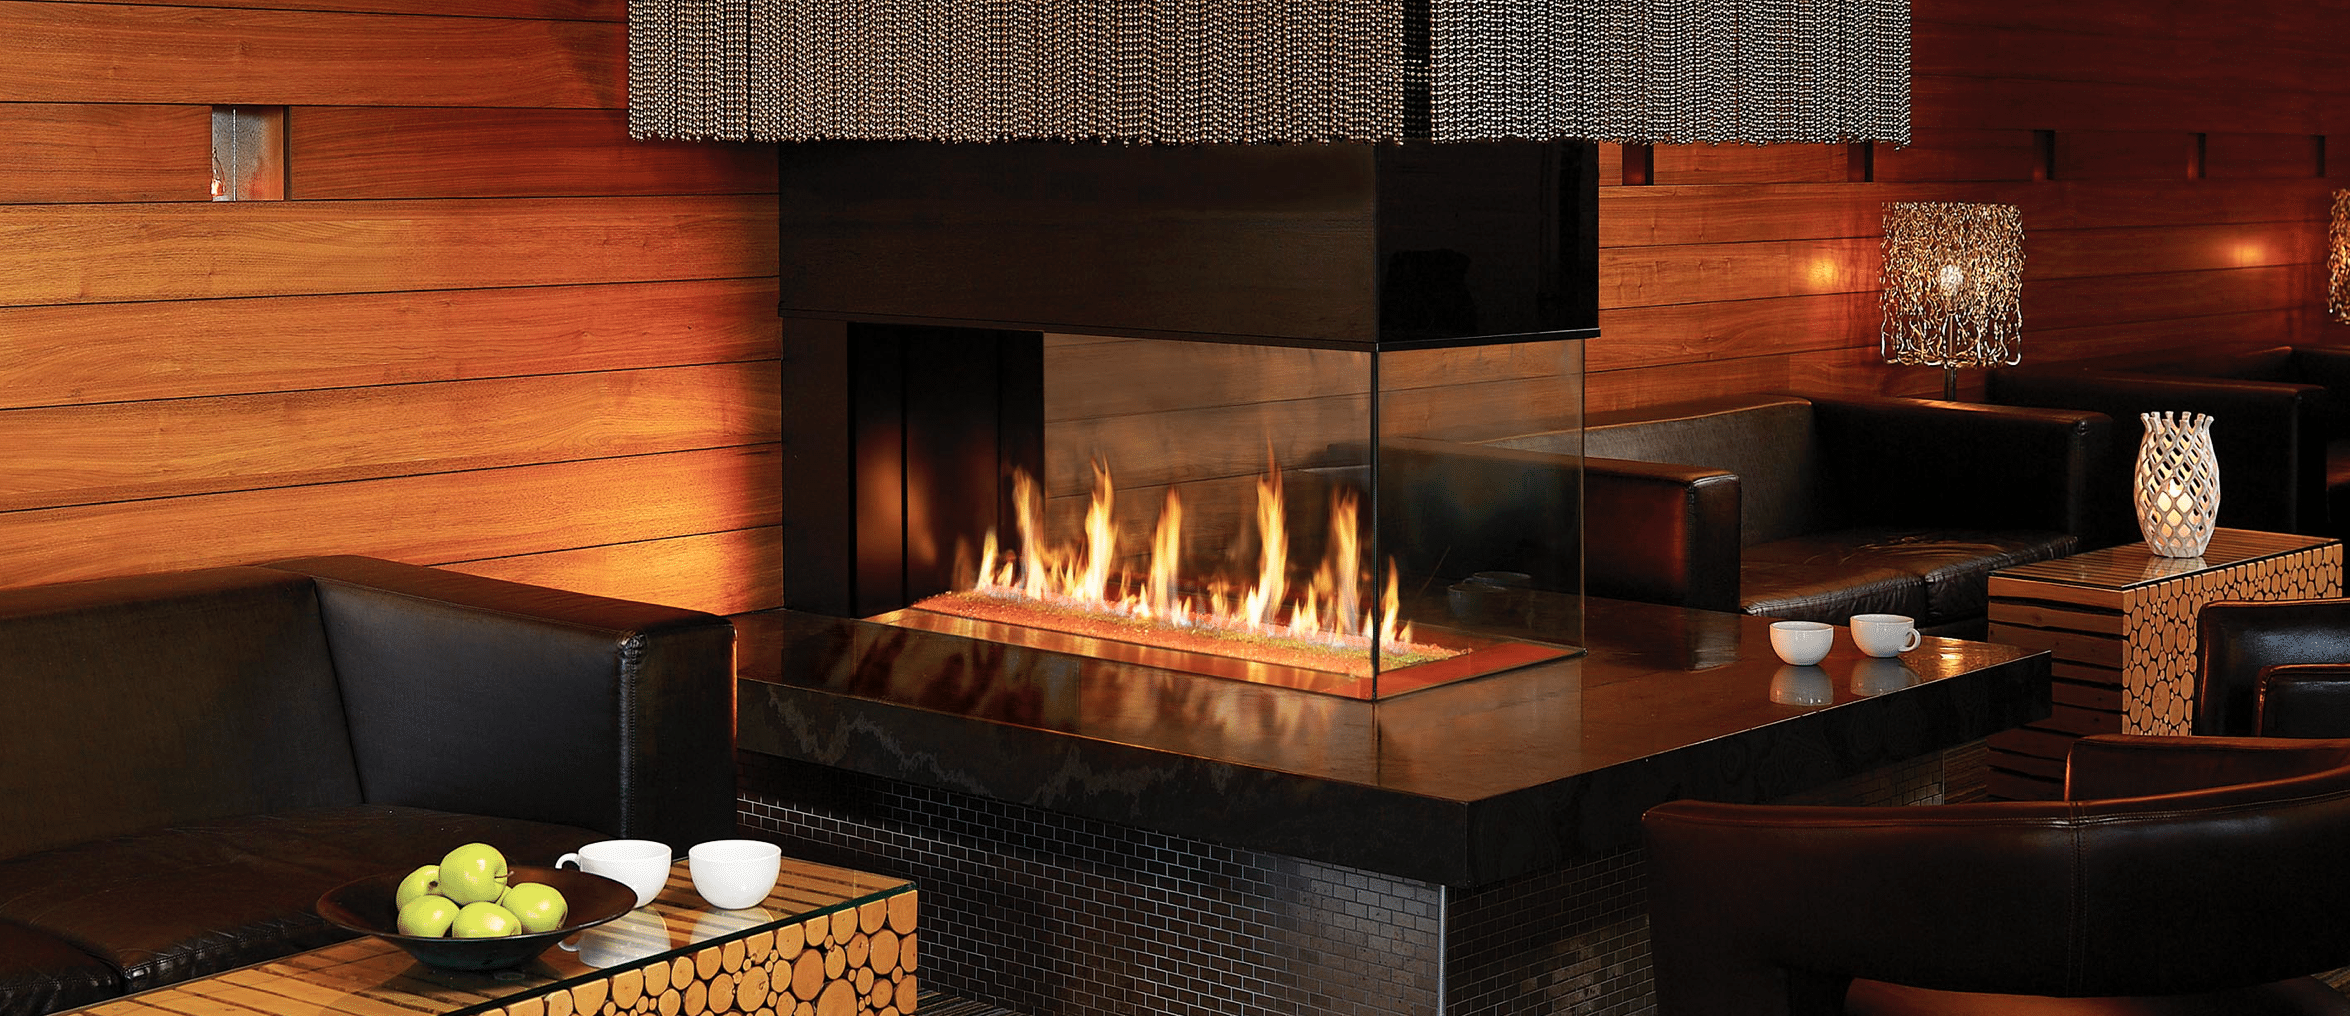 fireplace with a glass surround